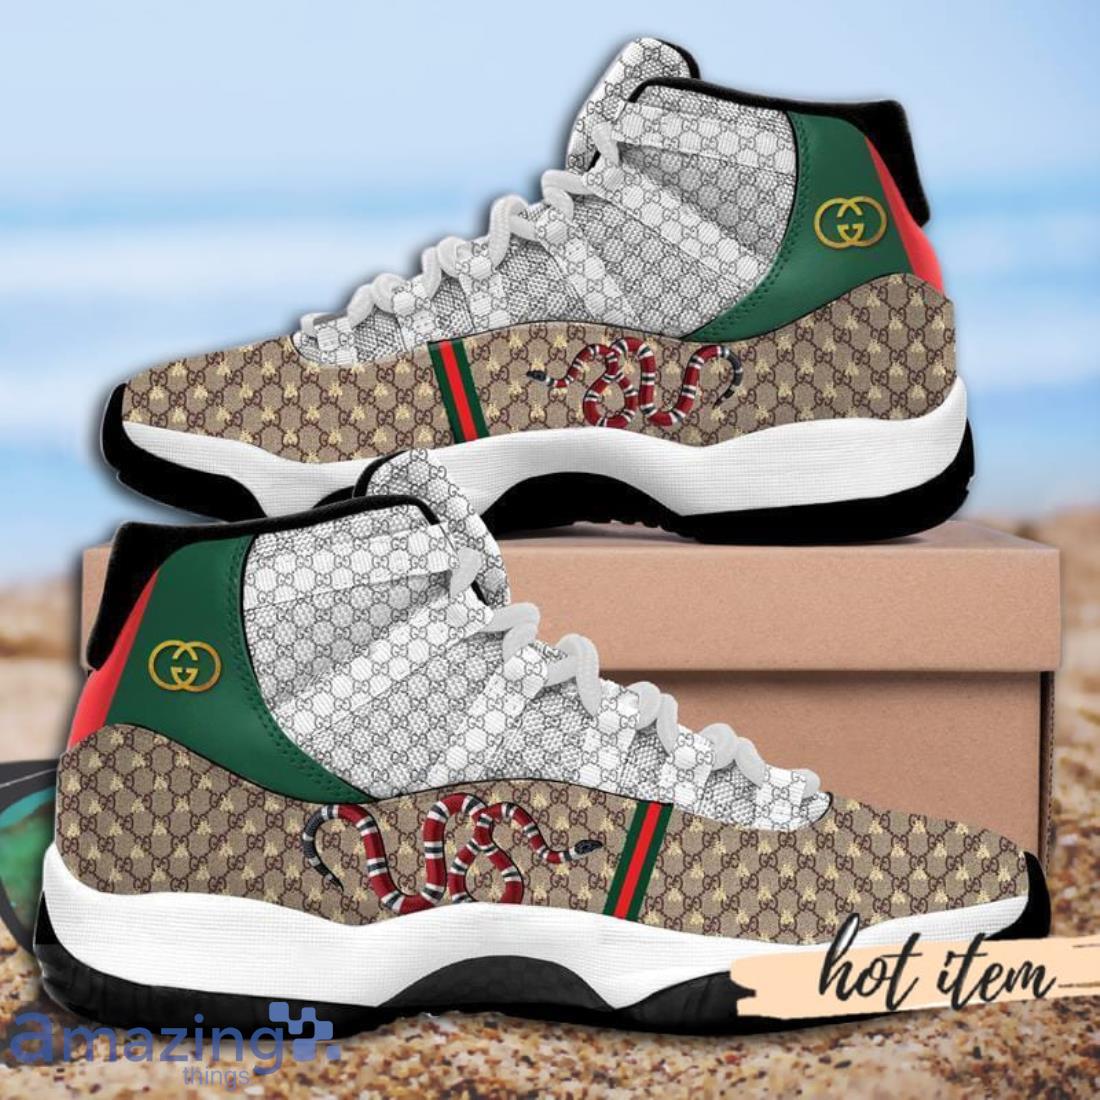 At passe hjemmelevering heroin Luxury Gucci Snake Air Jordan 11 Shoes Gucci Sneakers Gifts For Men Women